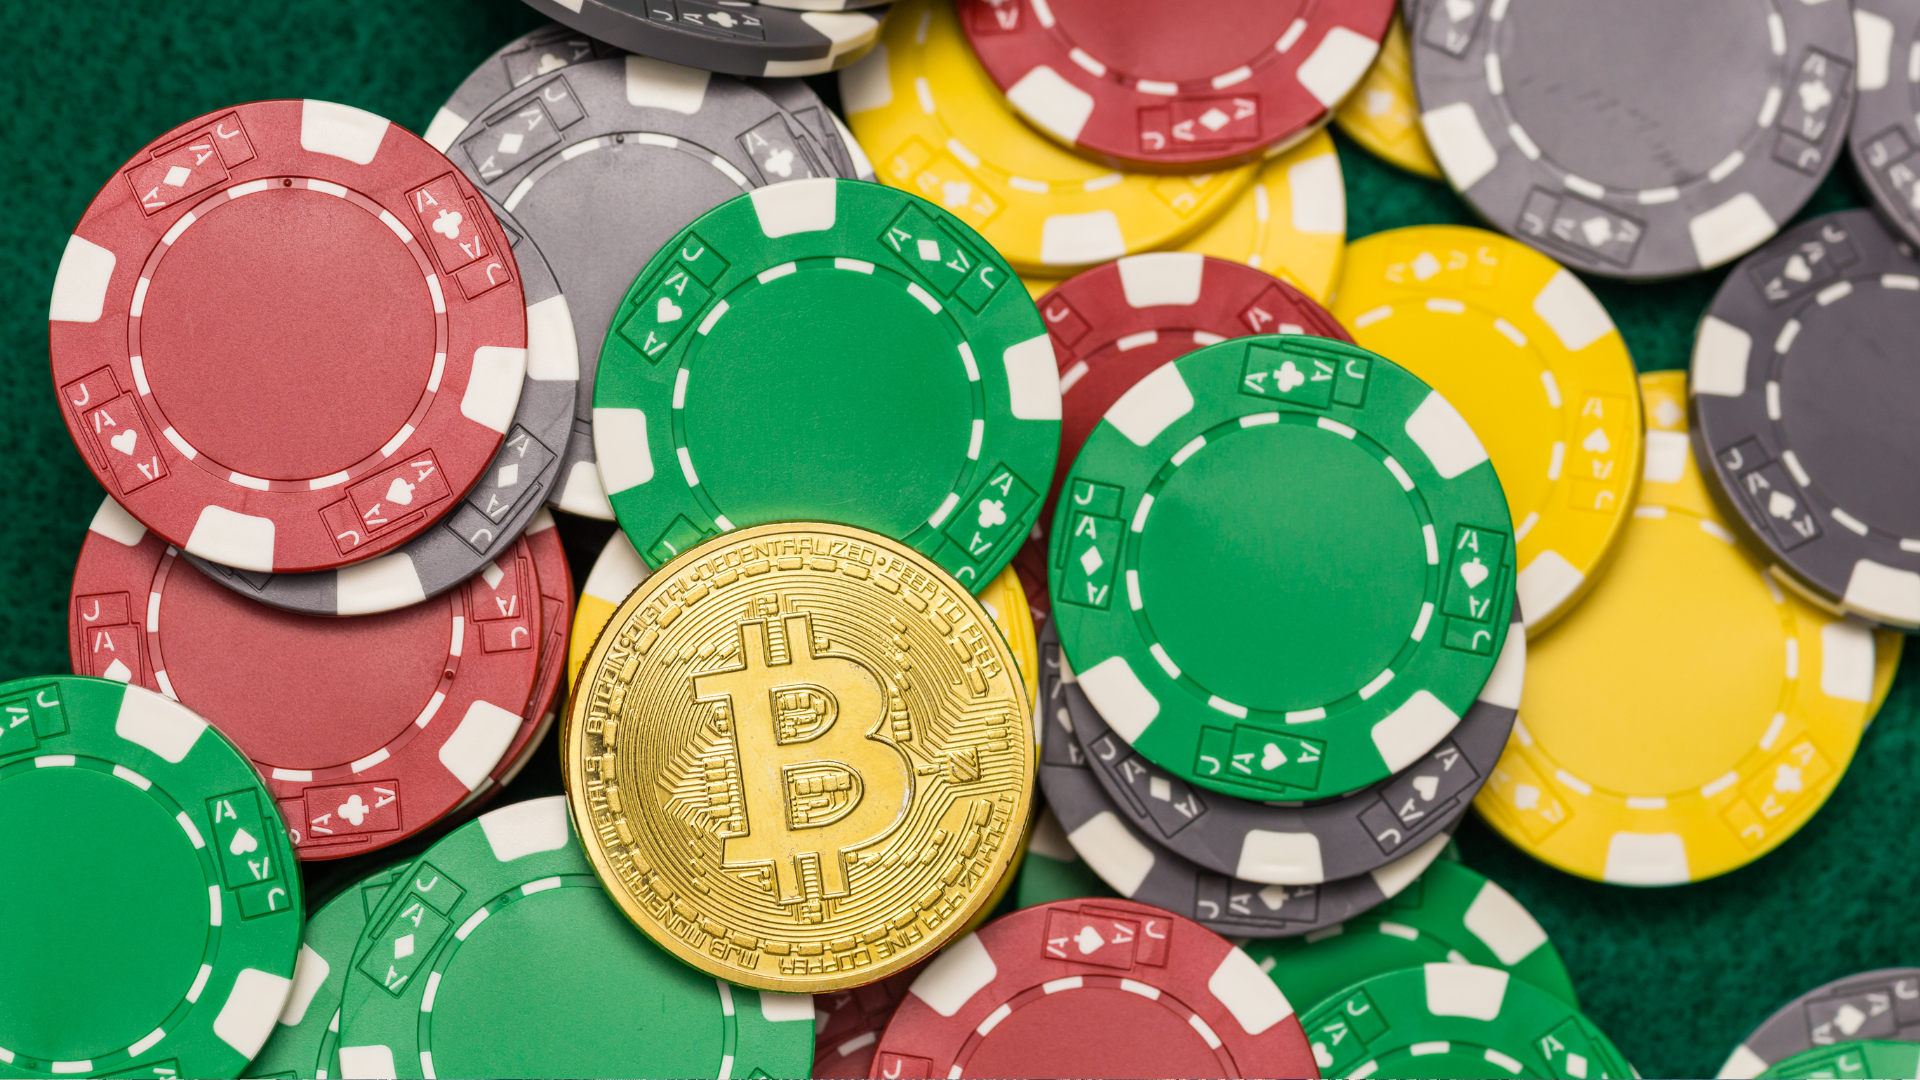 Can Bitcoin payments change the iGaming industry?